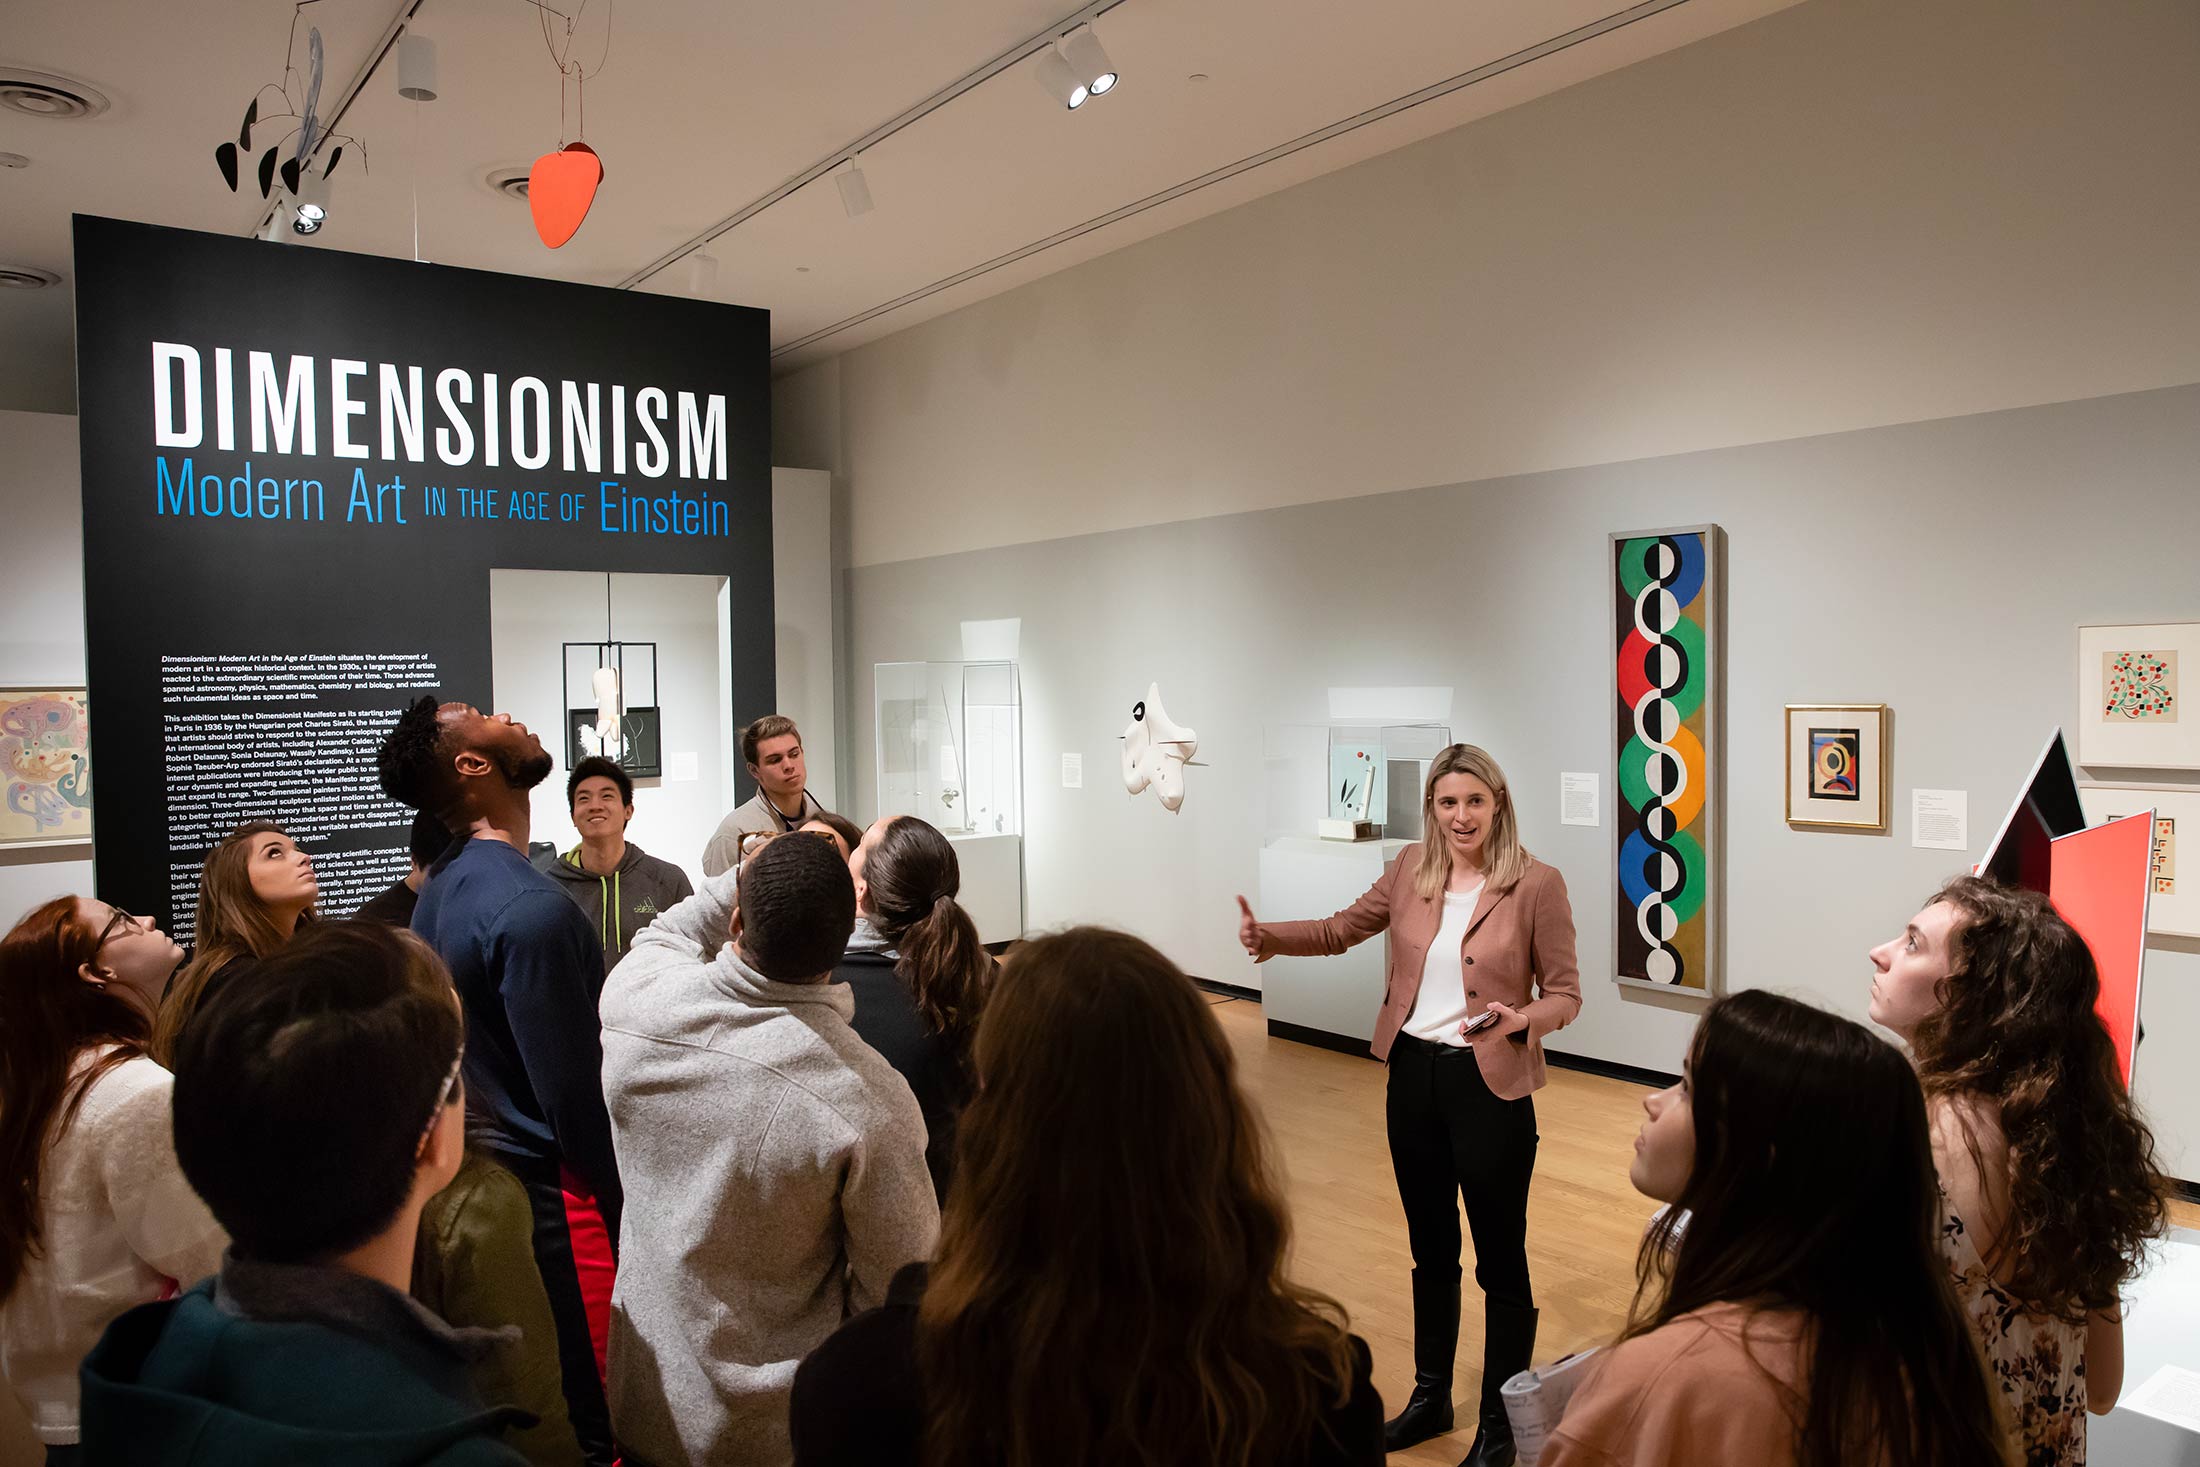 Curator Vanja Malloy gives a guided tour of the “Dimensionism” show